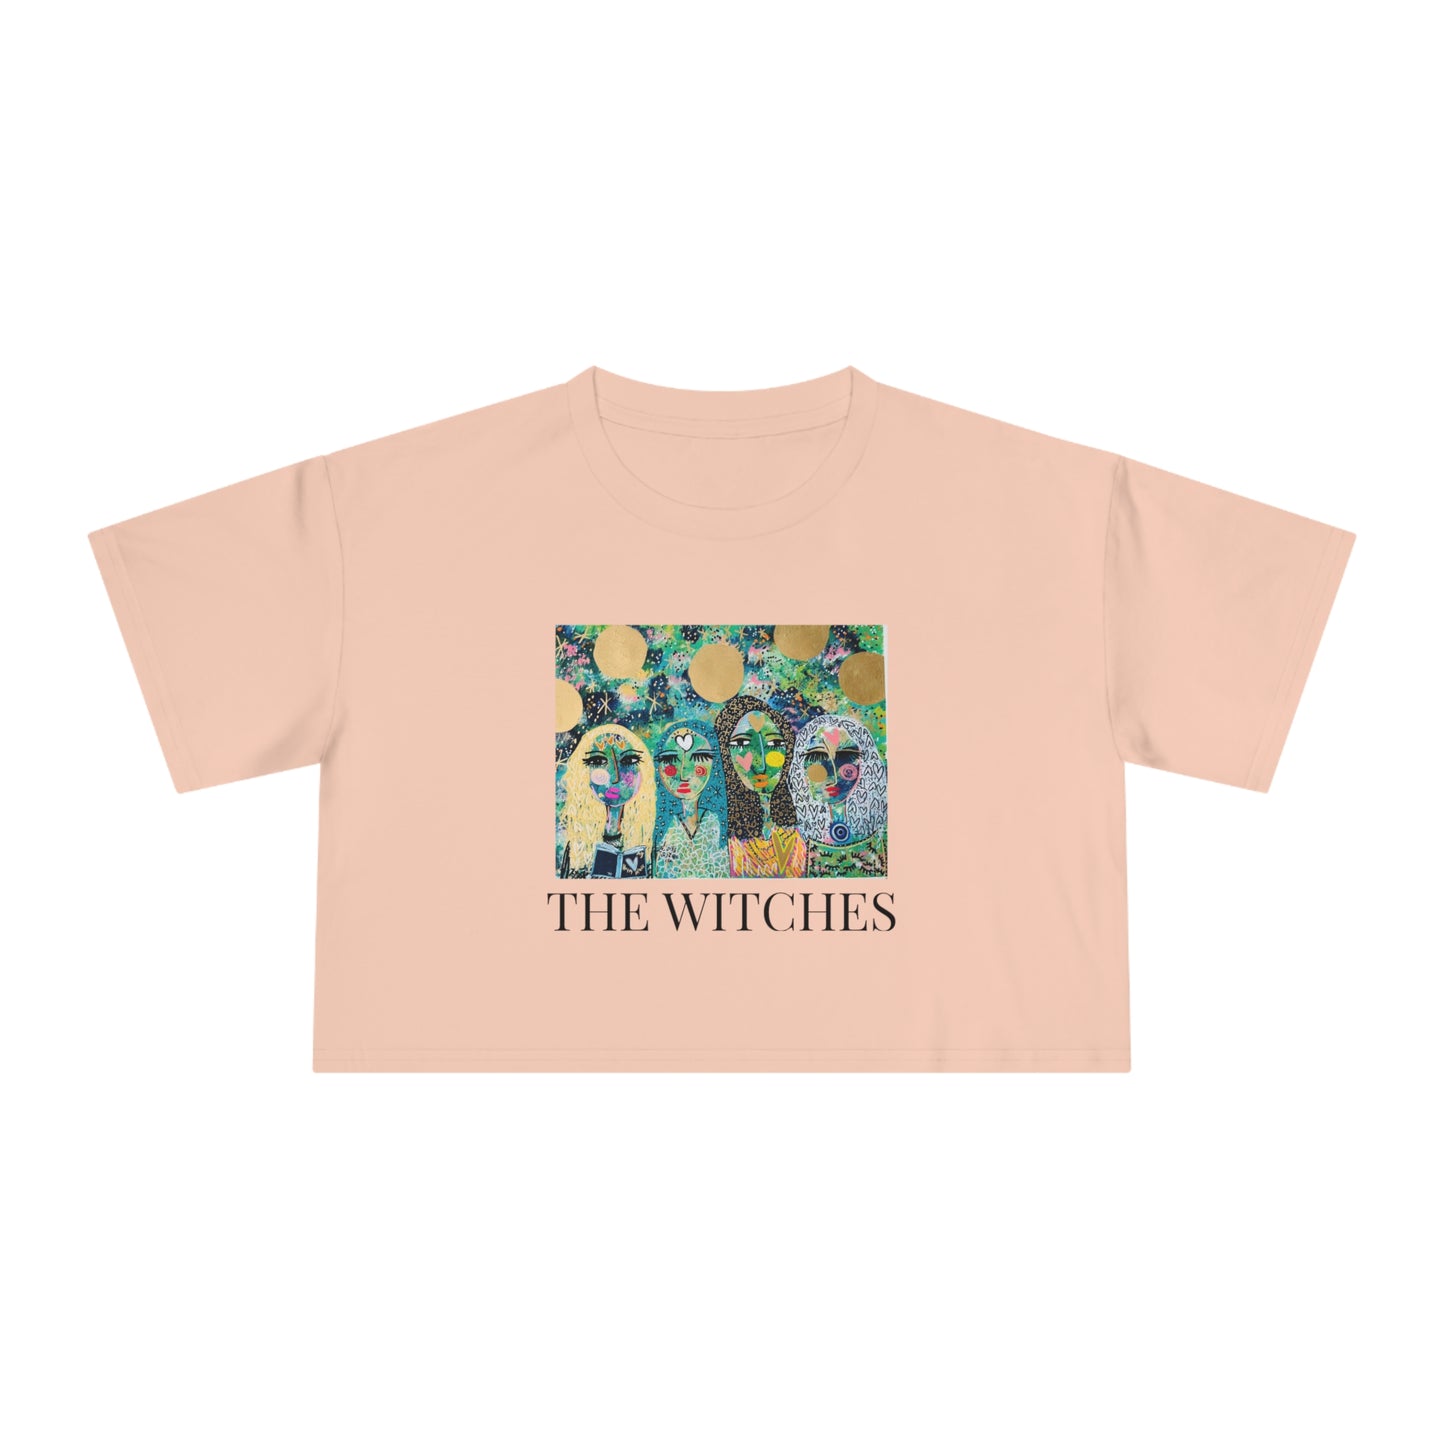 "THE WITCHES" Women's Crop Tee